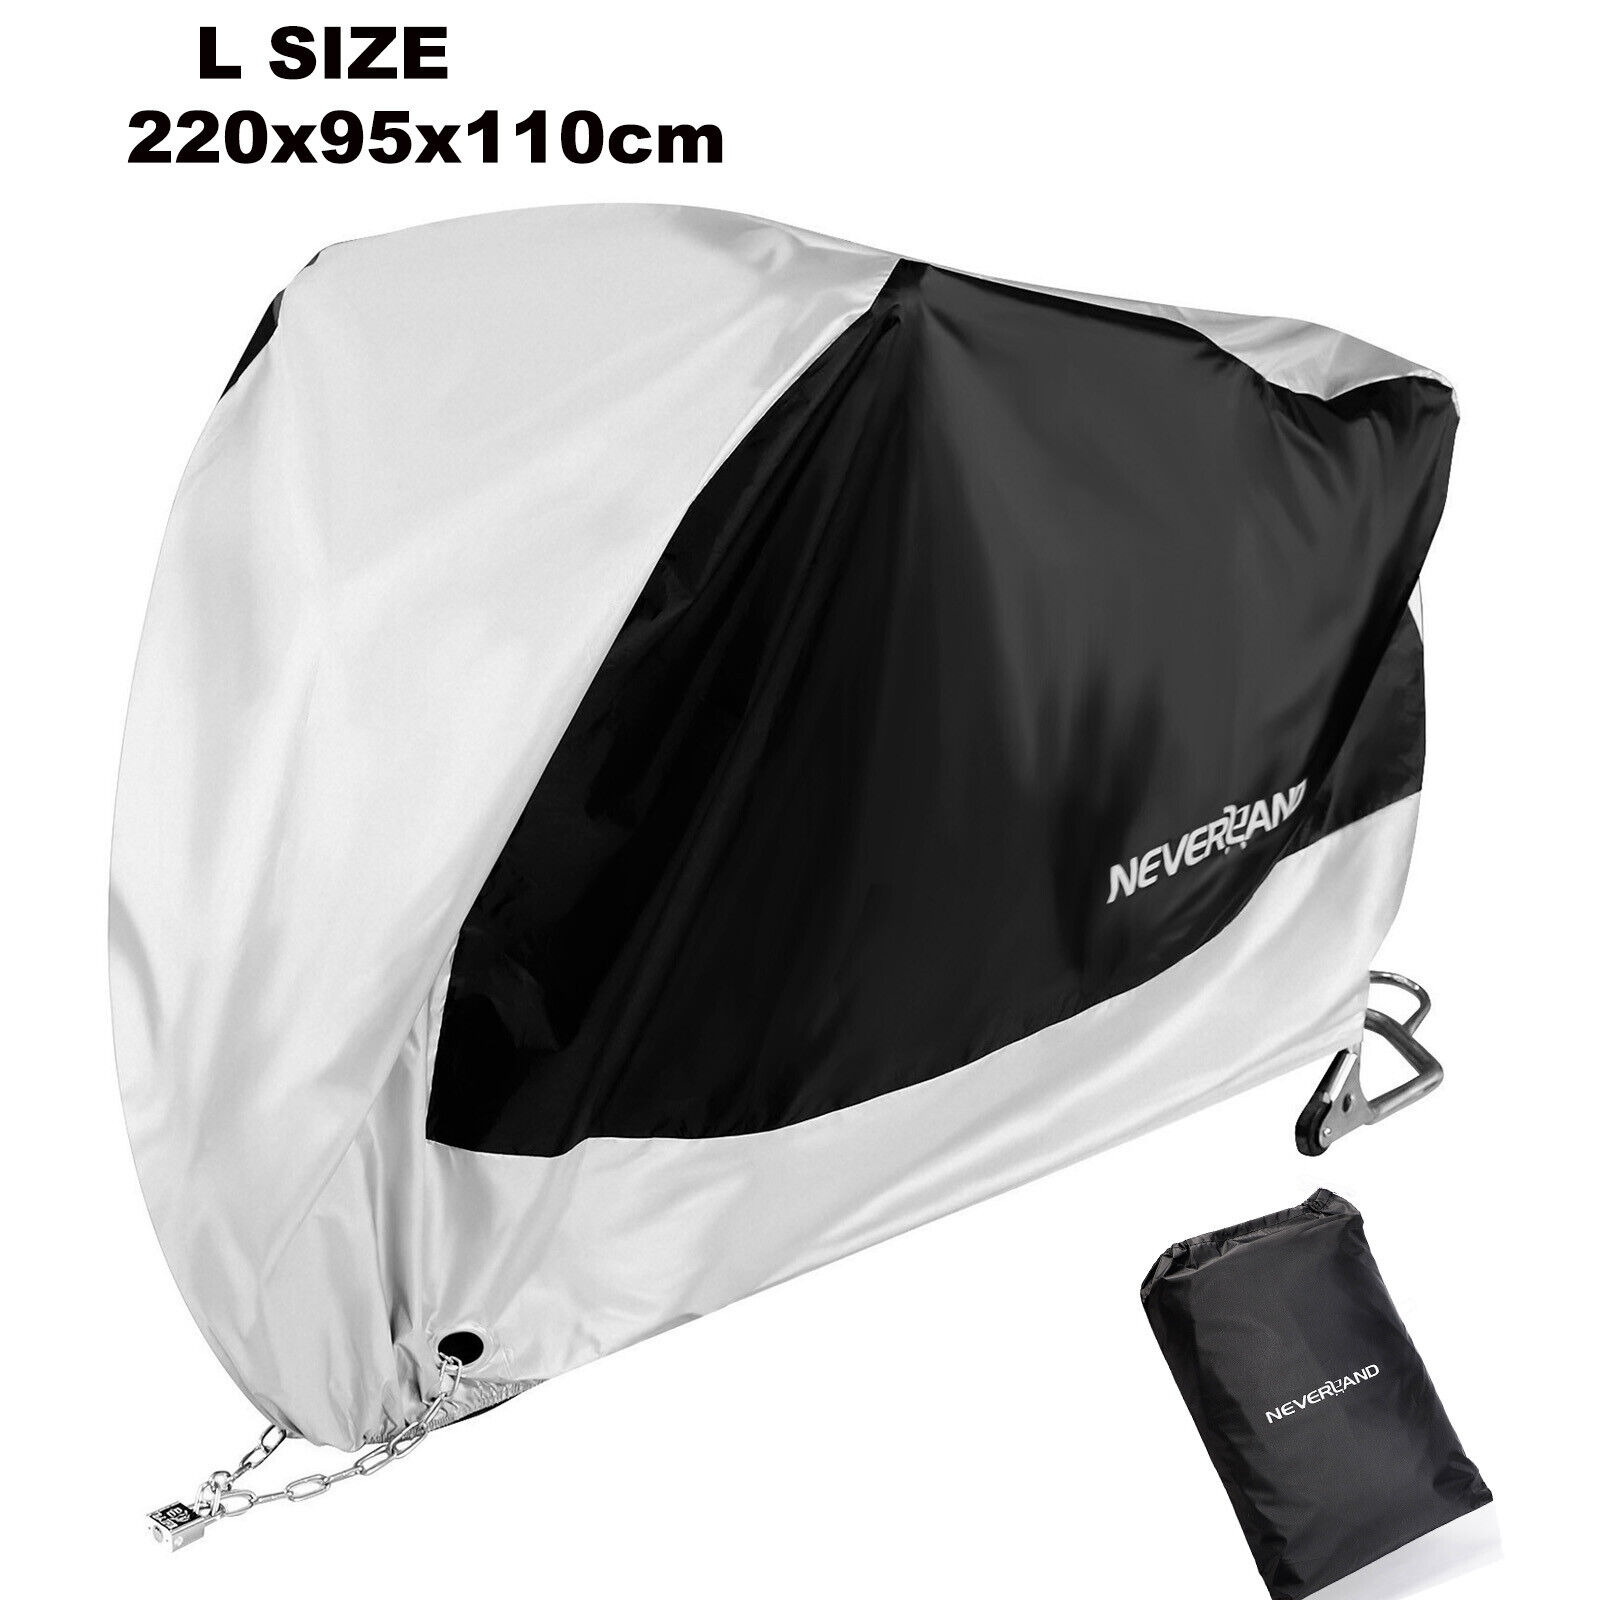 Large Waterproof Motorcycle Cover Heavy Duty for Sun Snow UV Rain Dust Resistant